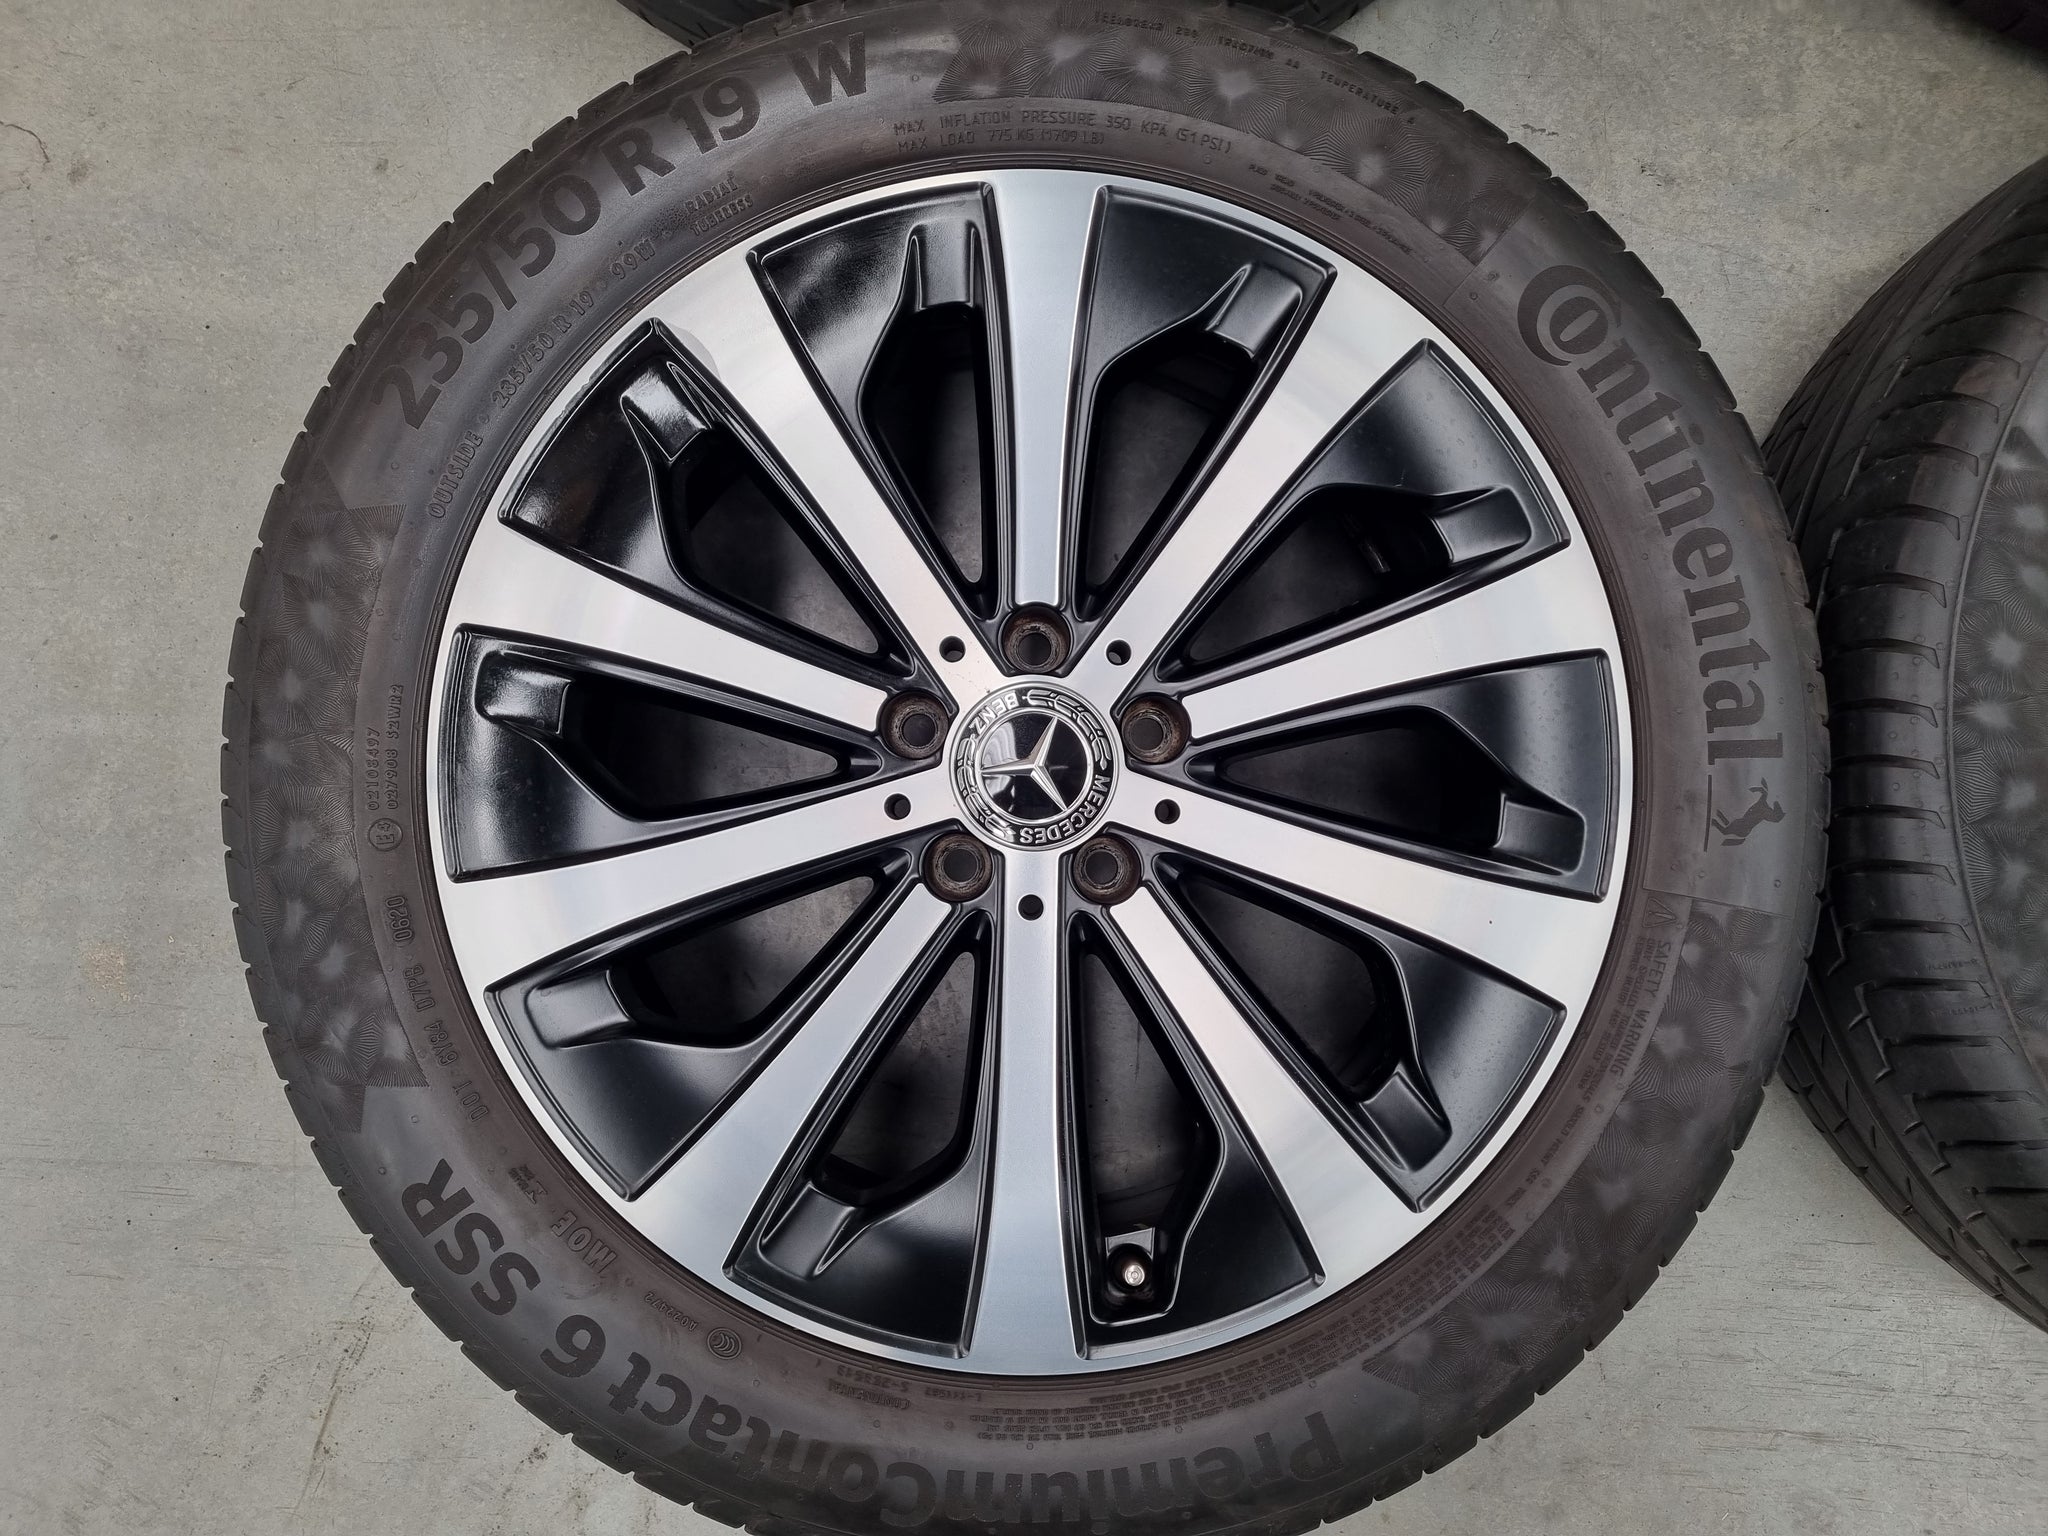 Load image into Gallery viewer, Genuine Mercedes Benz GLB X247 19 Inch Wheels and Tyres Set of 4
